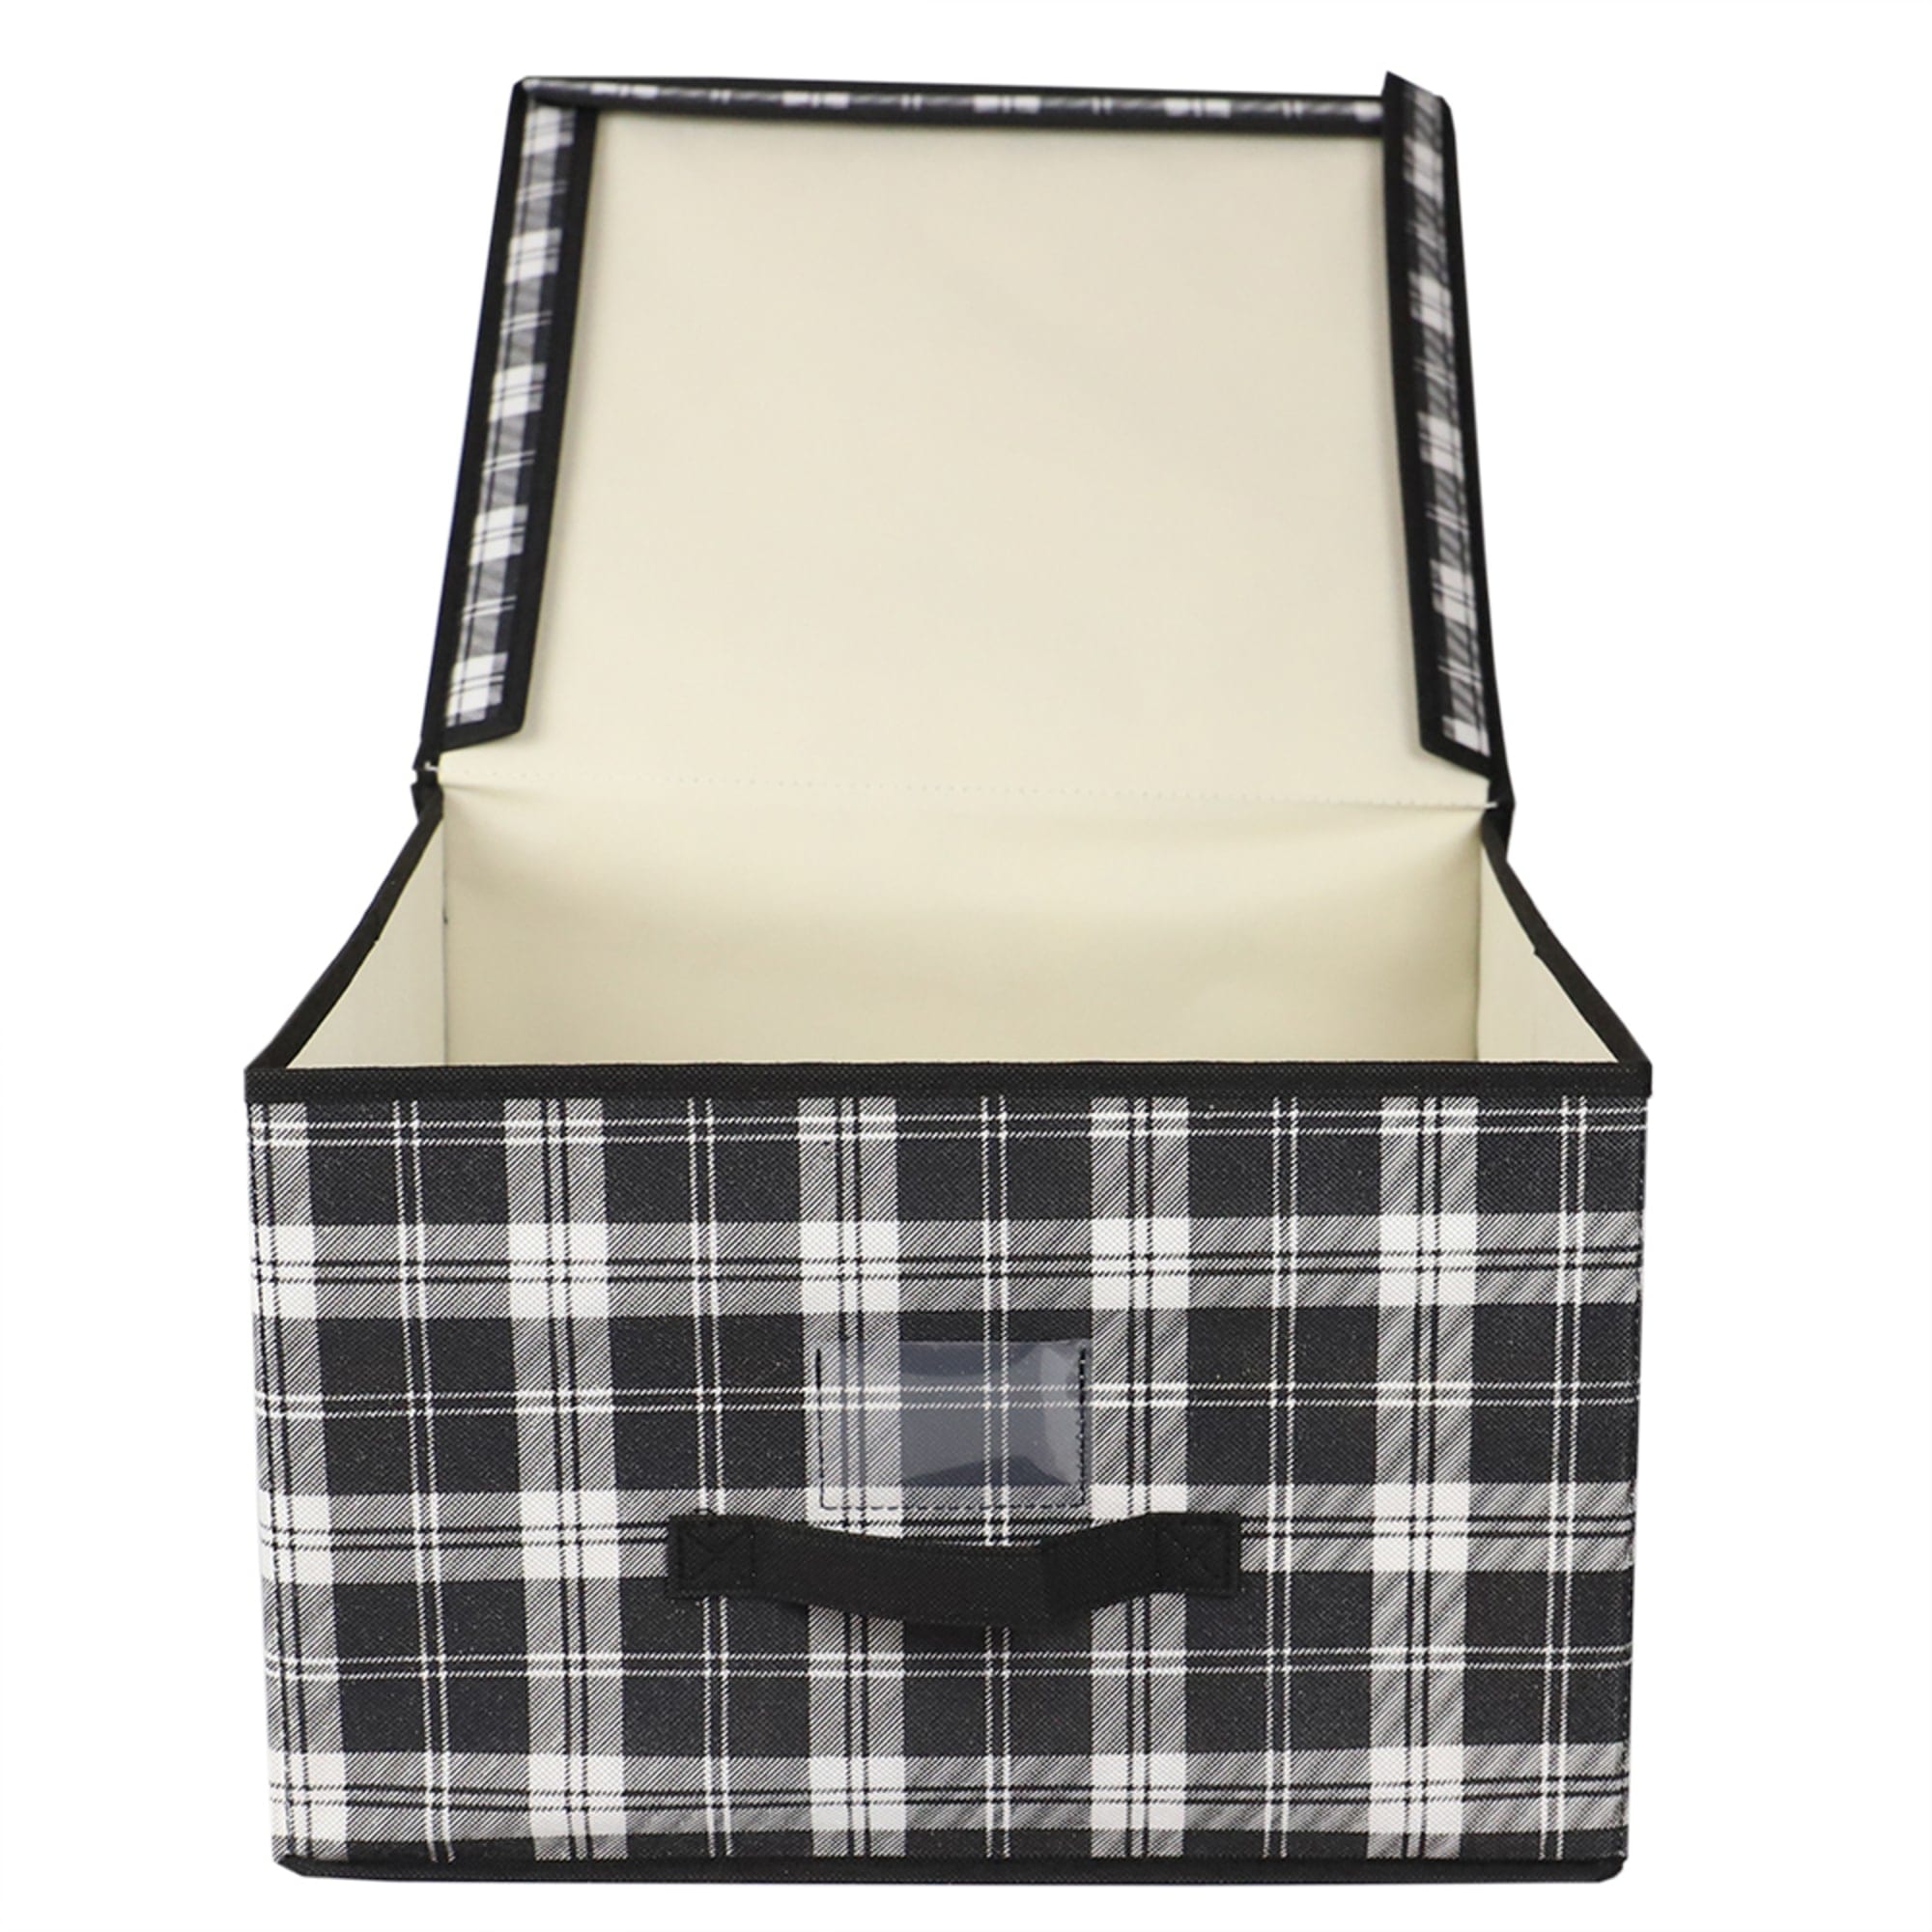 Home Basics Plaid Non-Woven Jumbo Storage Box with Label Window, Black $6.00 EACH, CASE PACK OF 12